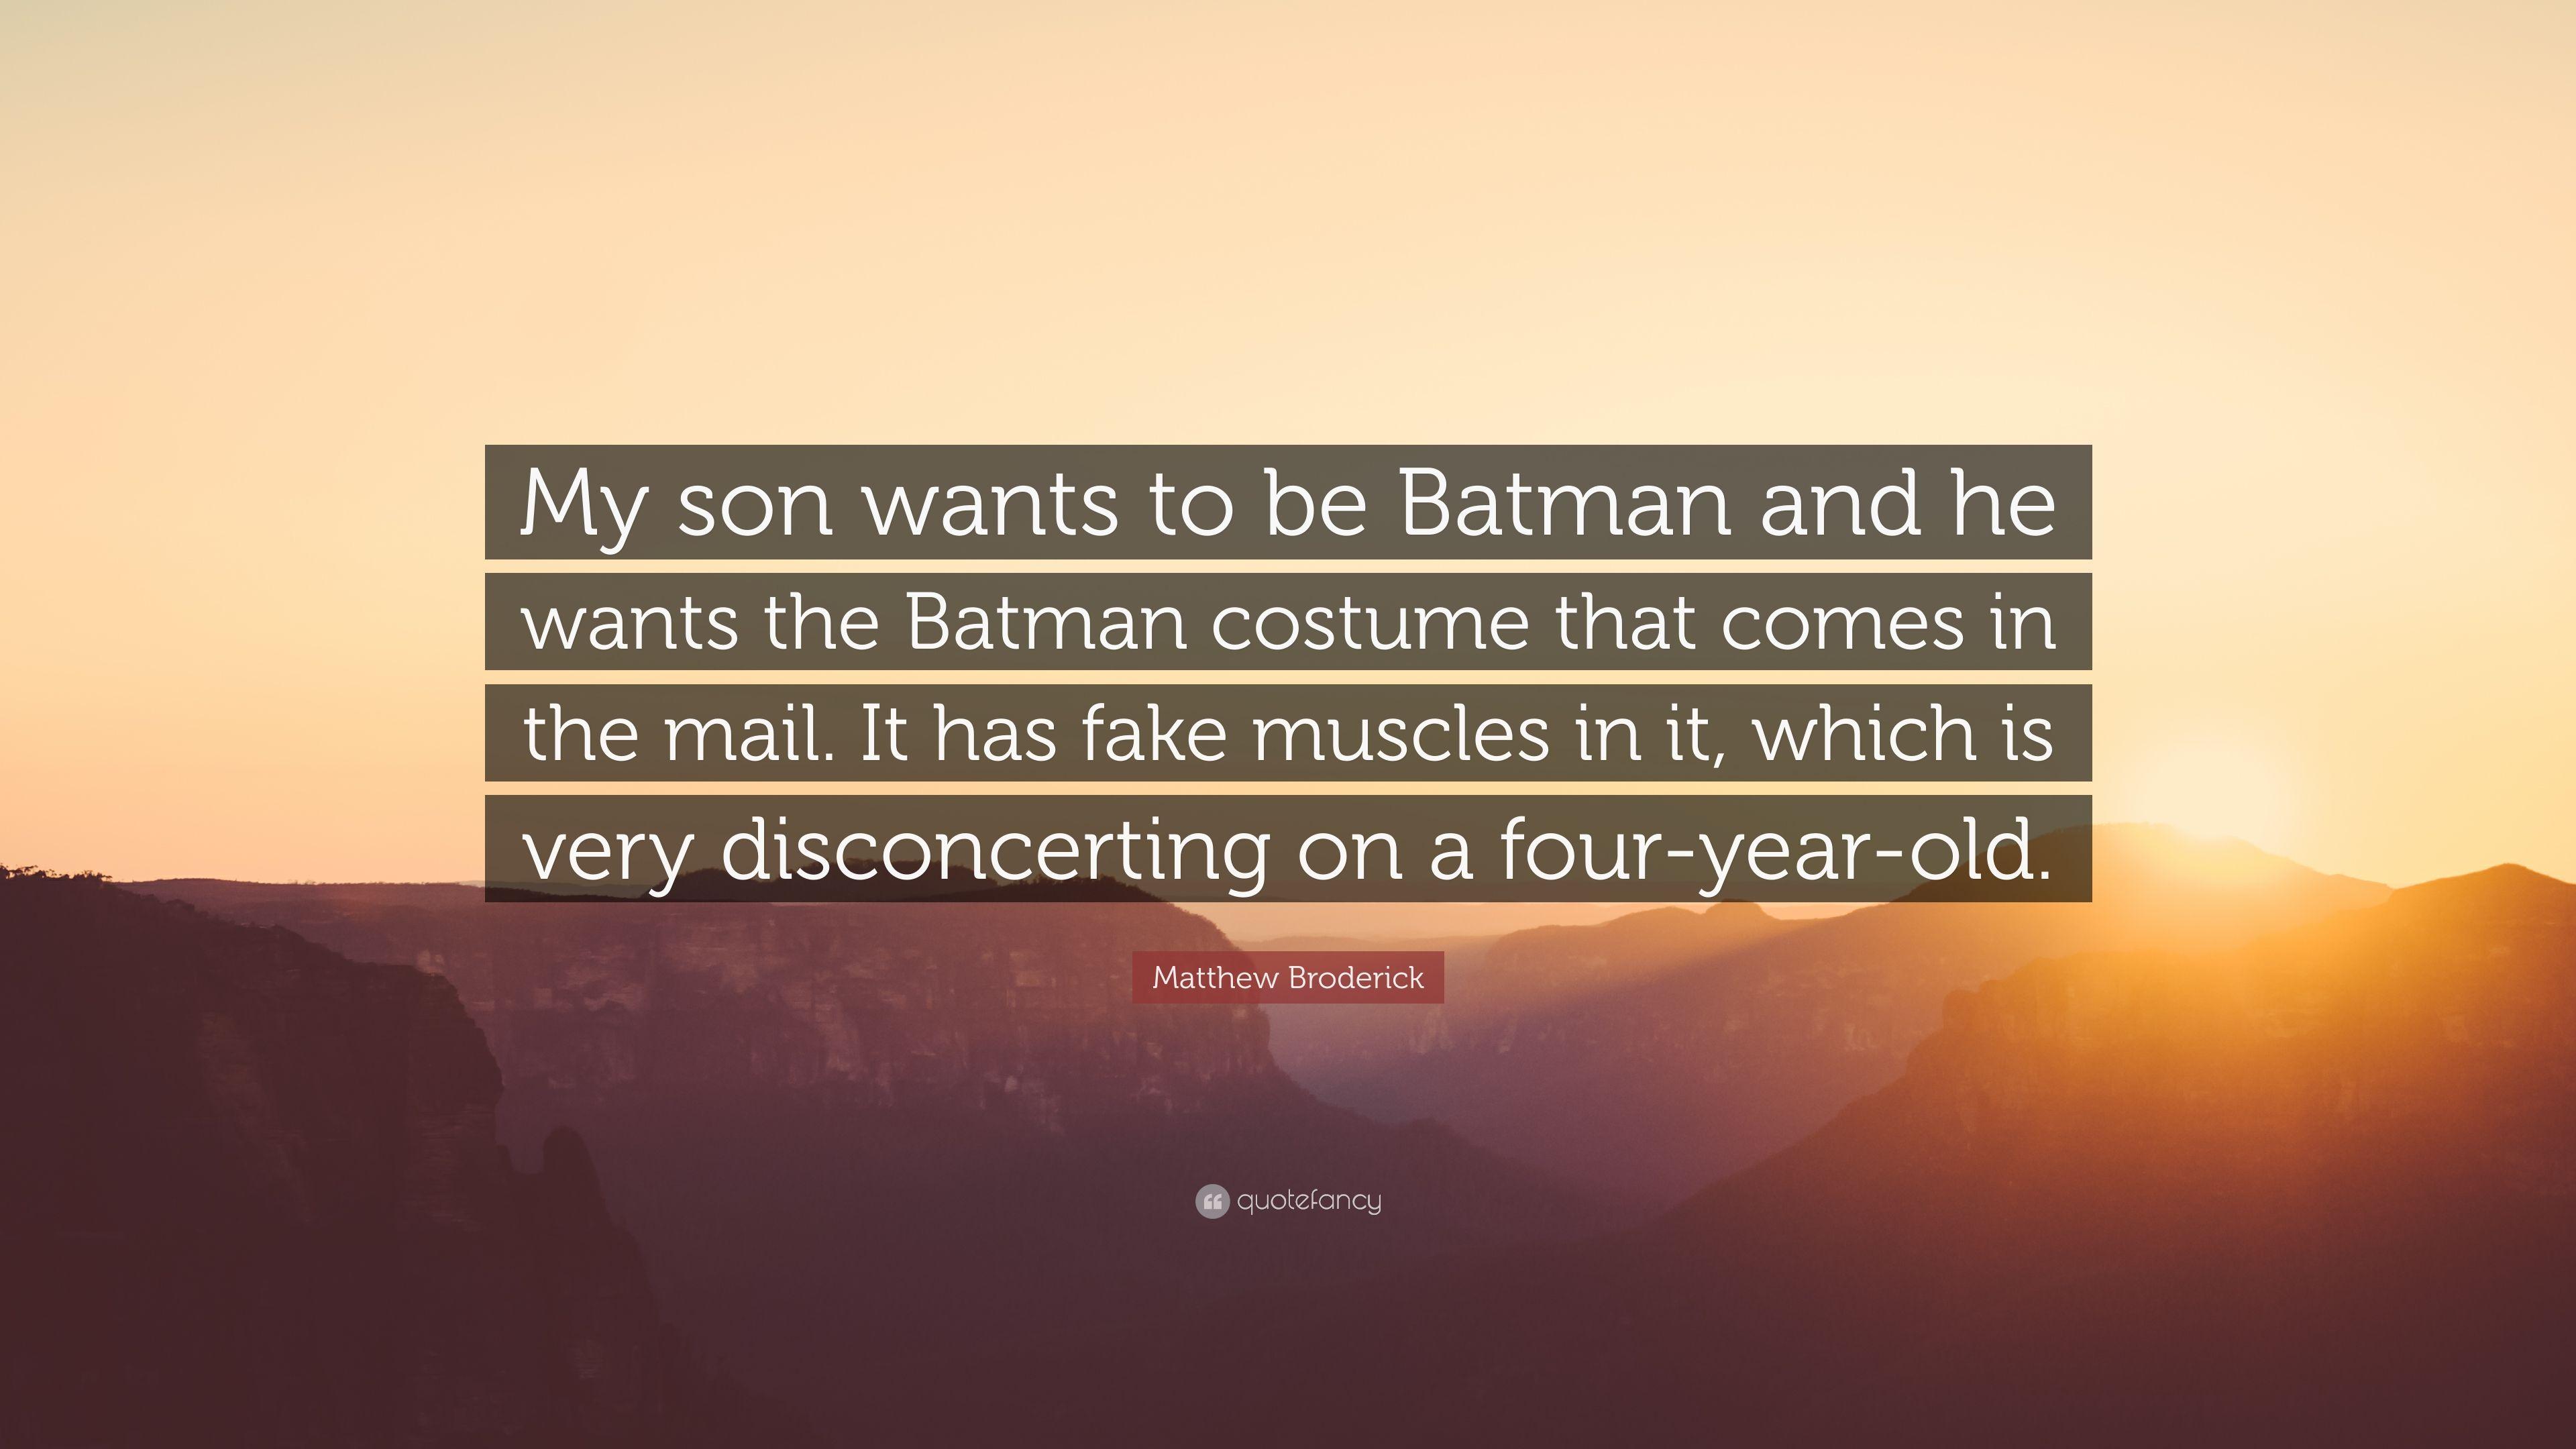 Matthew Broderick Quote: “My son wants to be Batman and he wants